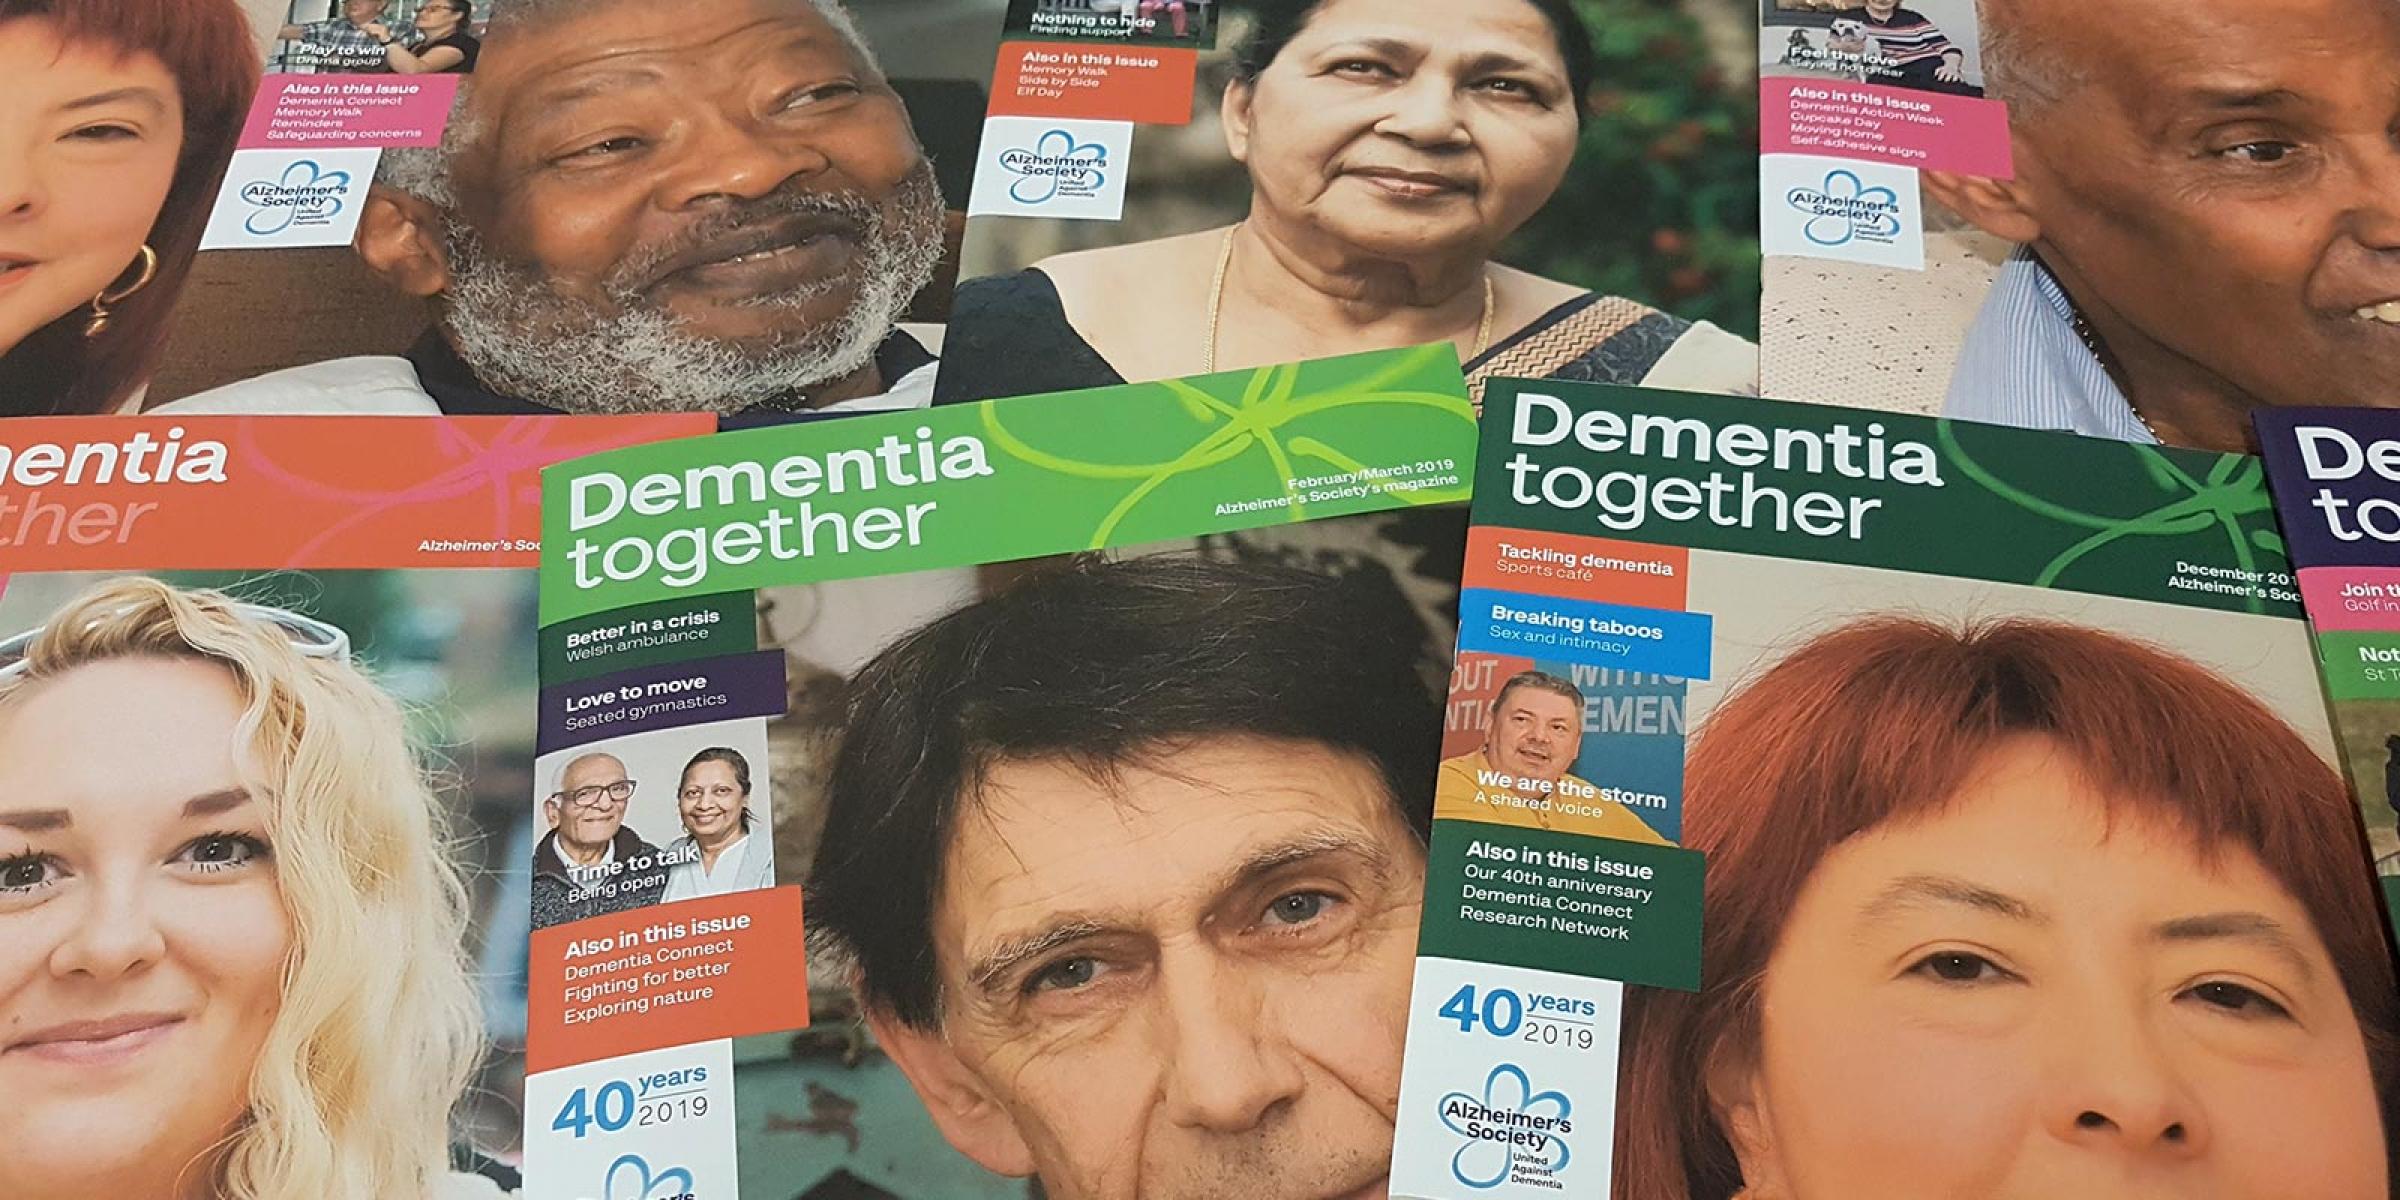 Dementia together magazine covers